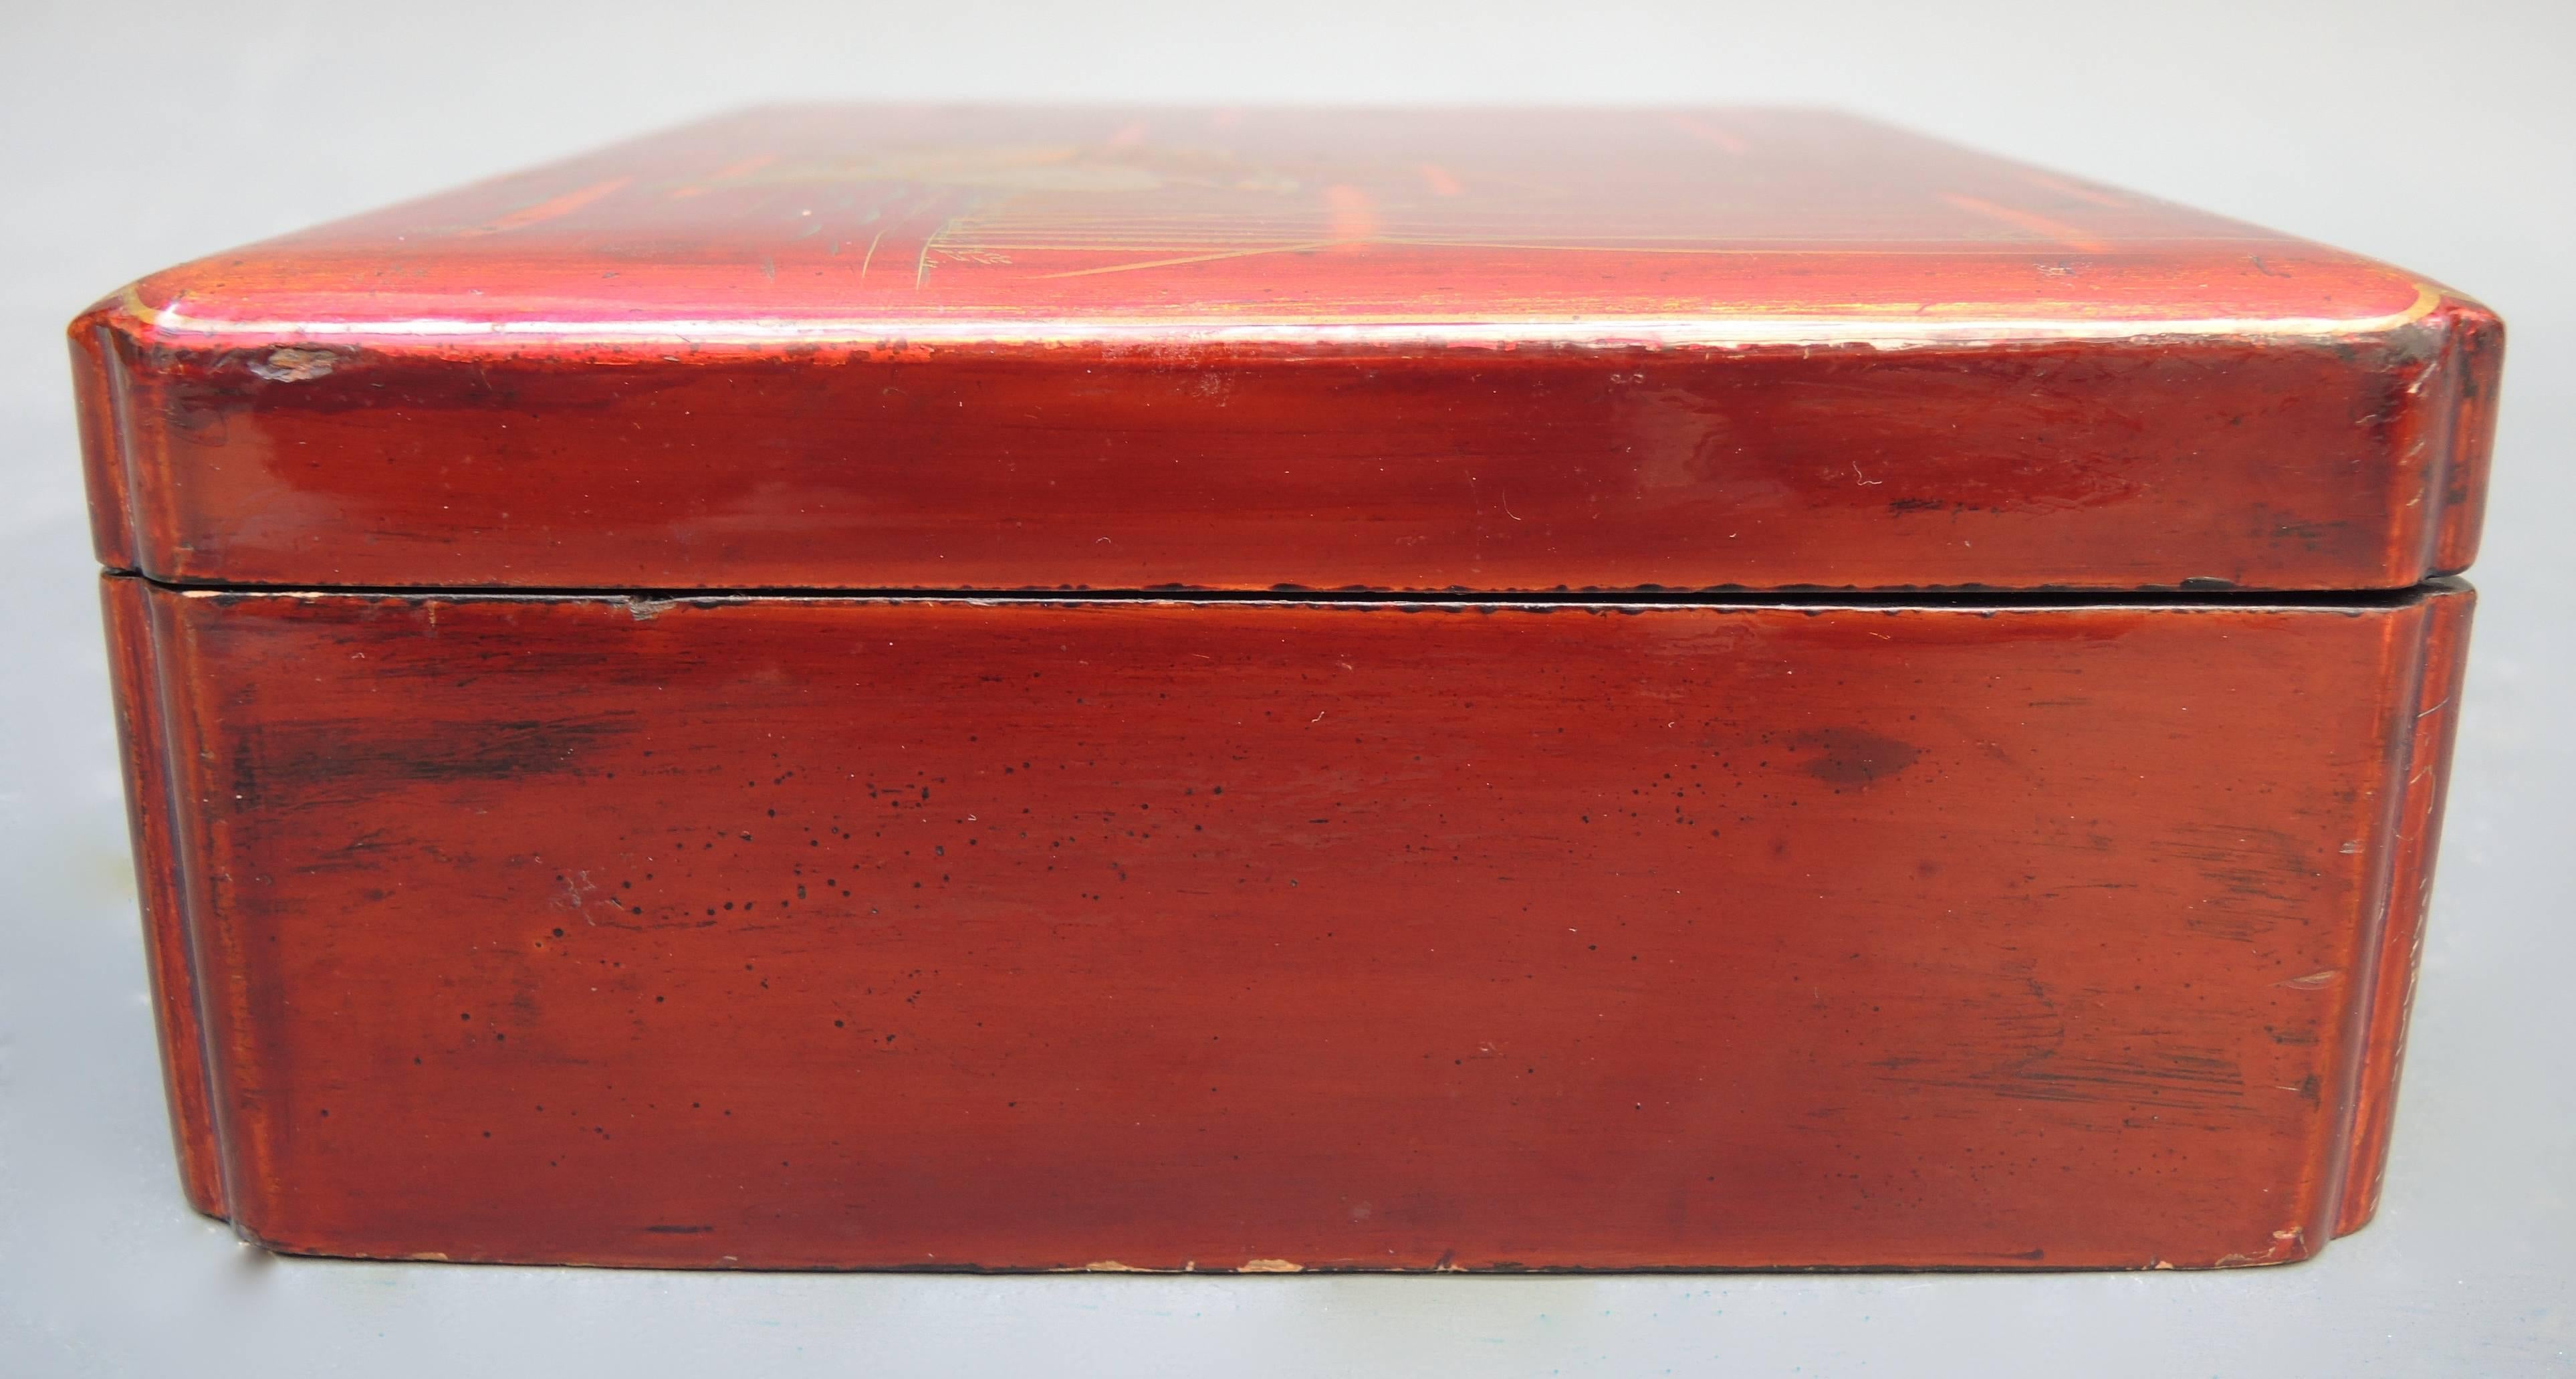 20th Century Japanese Burnt Orange Lacquered Box with Gold Painted Cranes